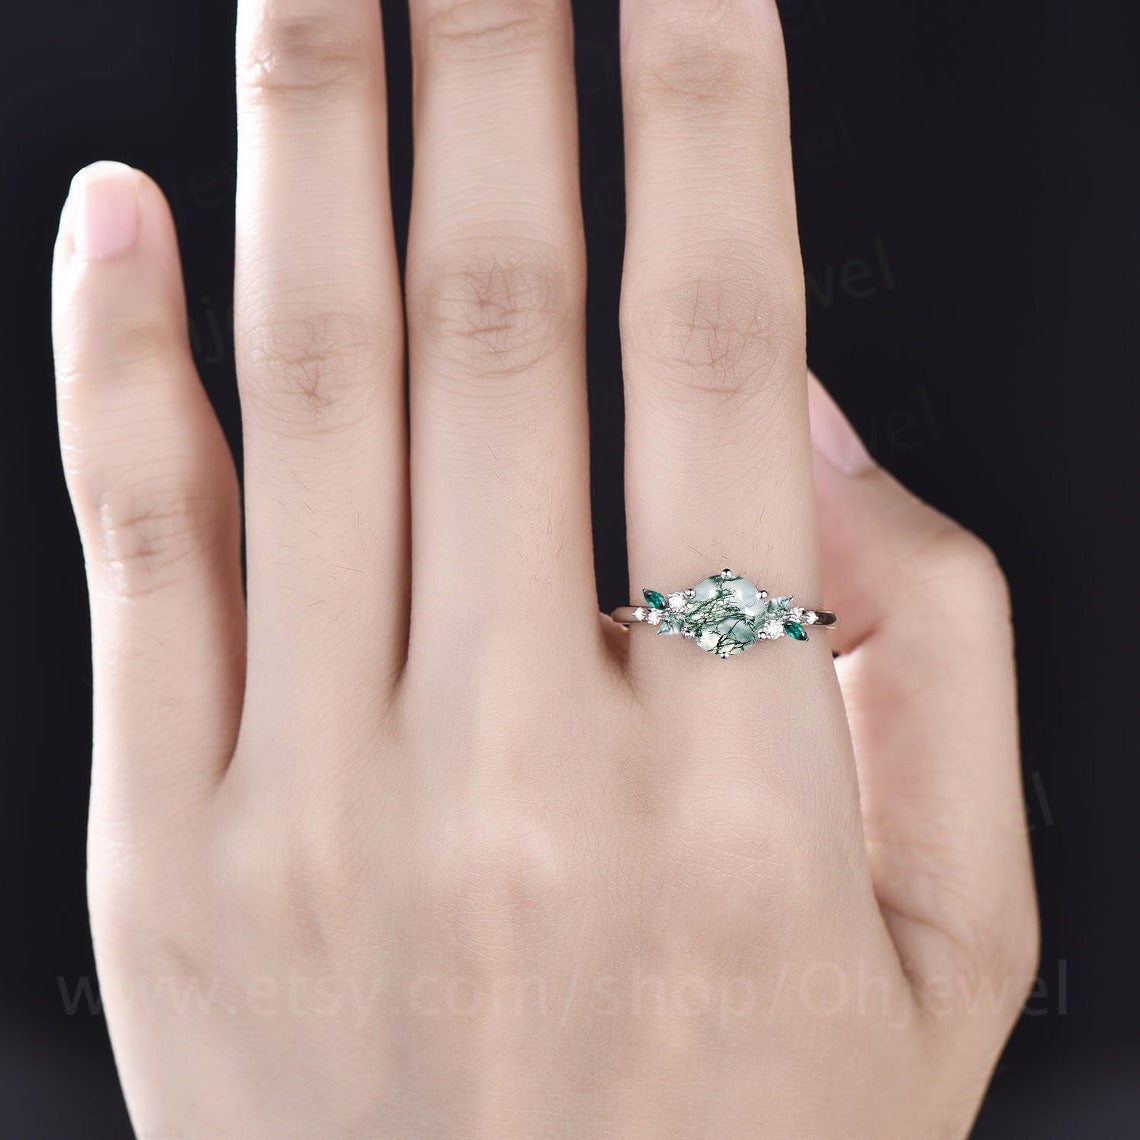 Vintage round green moss agate engagement ring rose gold 6 prong cluster snowdrift diamond ring unique bridal promise wedding ring women